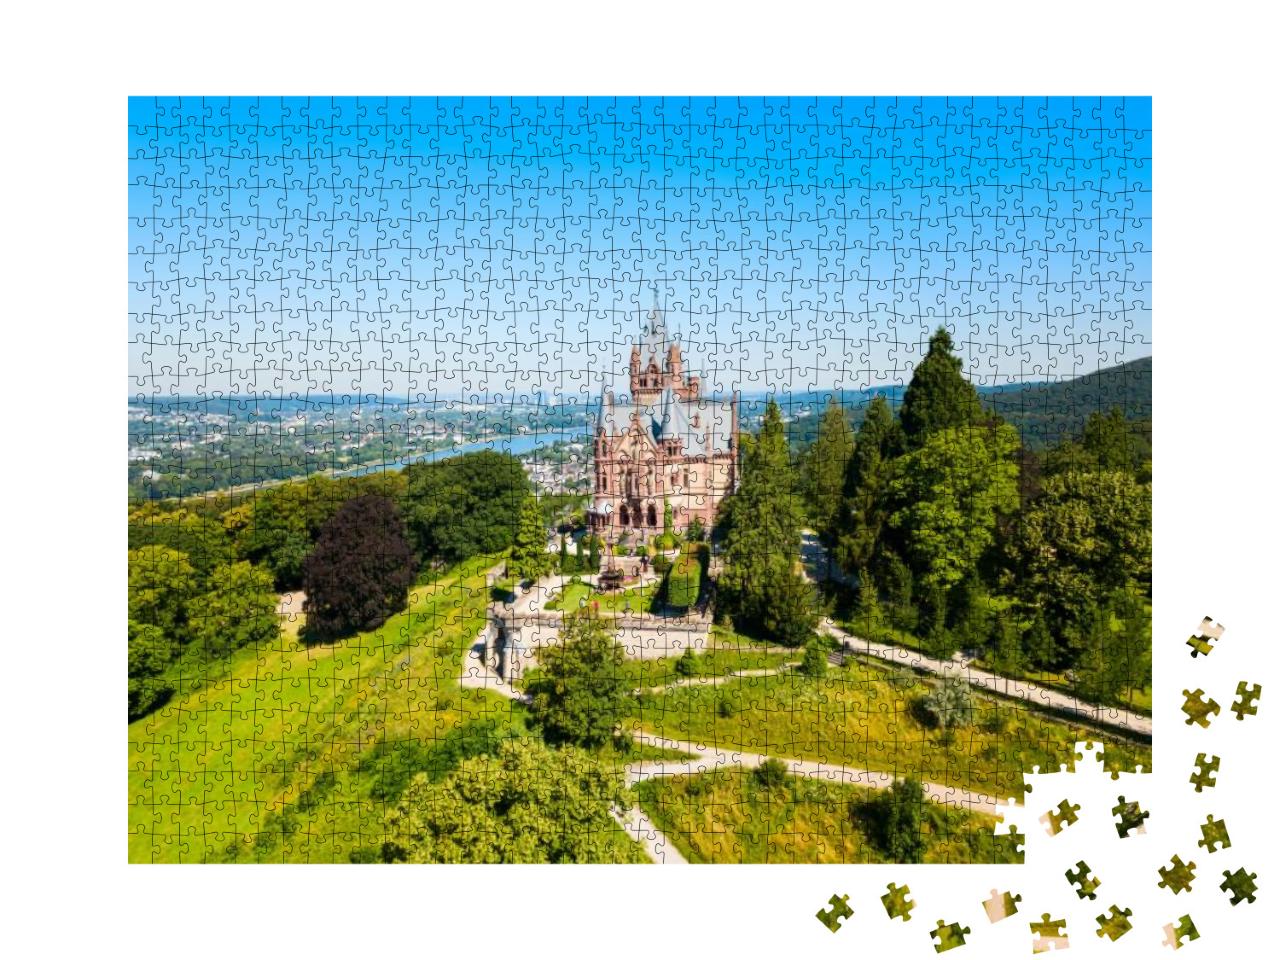 Schloss Drachenburg Castle is a Palace in Konigswinter on... Jigsaw Puzzle with 1000 pieces